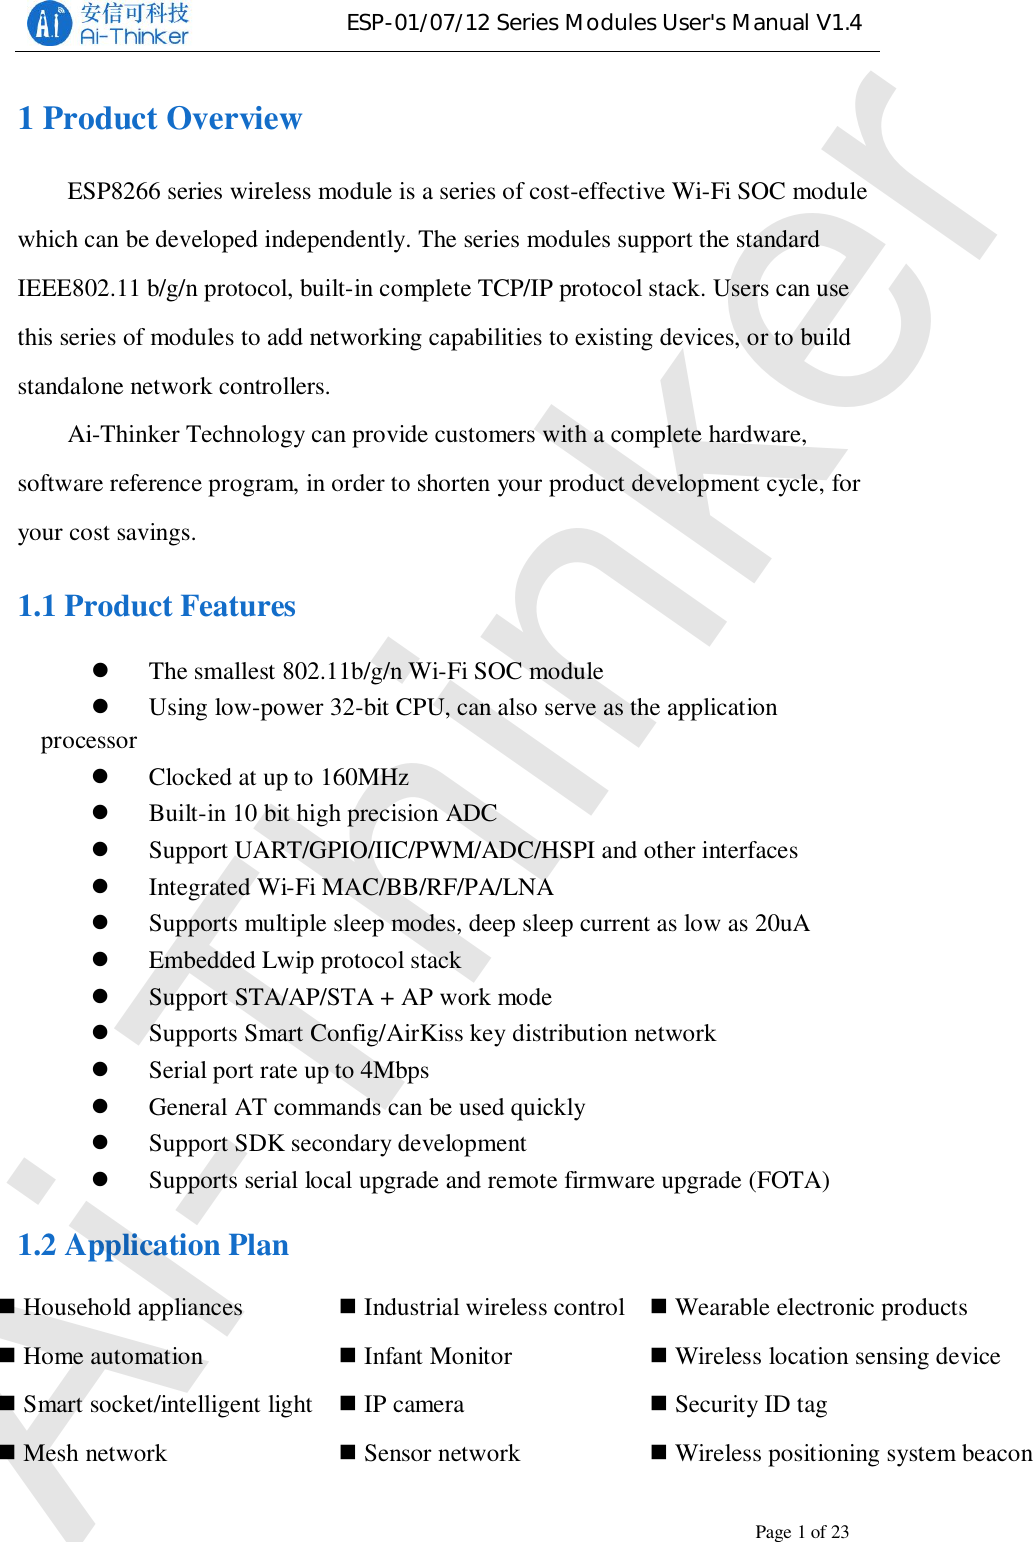 ESP-01/07/12 Series Modules User&apos;s Manual V1.4Copyright © 2017 Shenzhen Ai-Thinker Technology Co., Ltd All Rights ReservedPage1of231 Product OverviewESP8266 series wireless module is a series of cost-effective Wi-Fi SOC modulewhich can be developed independently. The series modules support the standardIEEE802.11 b/g/n protocol, built-in complete TCP/IP protocol stack. Users can usethis series of modules to add networking capabilities to existing devices, or to buildstandalone network controllers.Ai-Thinker Technology can provide customers with a complete hardware,software reference program, in order to shorten your product development cycle, foryour cost savings.1.1 Product FeaturesThe smallest 802.11b/g/n Wi-Fi SOC moduleUsing low-power 32-bit CPU, can also serve as the applicationprocessorClocked at up to 160MHzBuilt-in 10 bit high precision ADCSupport UART/GPIO/IIC/PWM/ADC/HSPI and other interfacesIntegrated Wi-Fi MAC/BB/RF/PA/LNASupports multiple sleep modes, deep sleep current as low as 20uAEmbedded Lwip protocol stackSupport STA/AP/STA + AP work modeSupports Smart Config/AirKiss key distribution networkSerial port rate up to 4MbpsGeneral AT commands can be used quicklySupport SDK secondary developmentSupports serial local upgrade and remote firmware upgrade (FOTA)1.2 Application PlanIndustrial wireless controlInfant MonitorIP cameraSensor networkHousehold appliancesHome automationSmart socket/intelligent lightMesh networkWearable electronic productsWireless location sensing deviceSecurity ID tagWireless positioning system beaconAi-Thinker